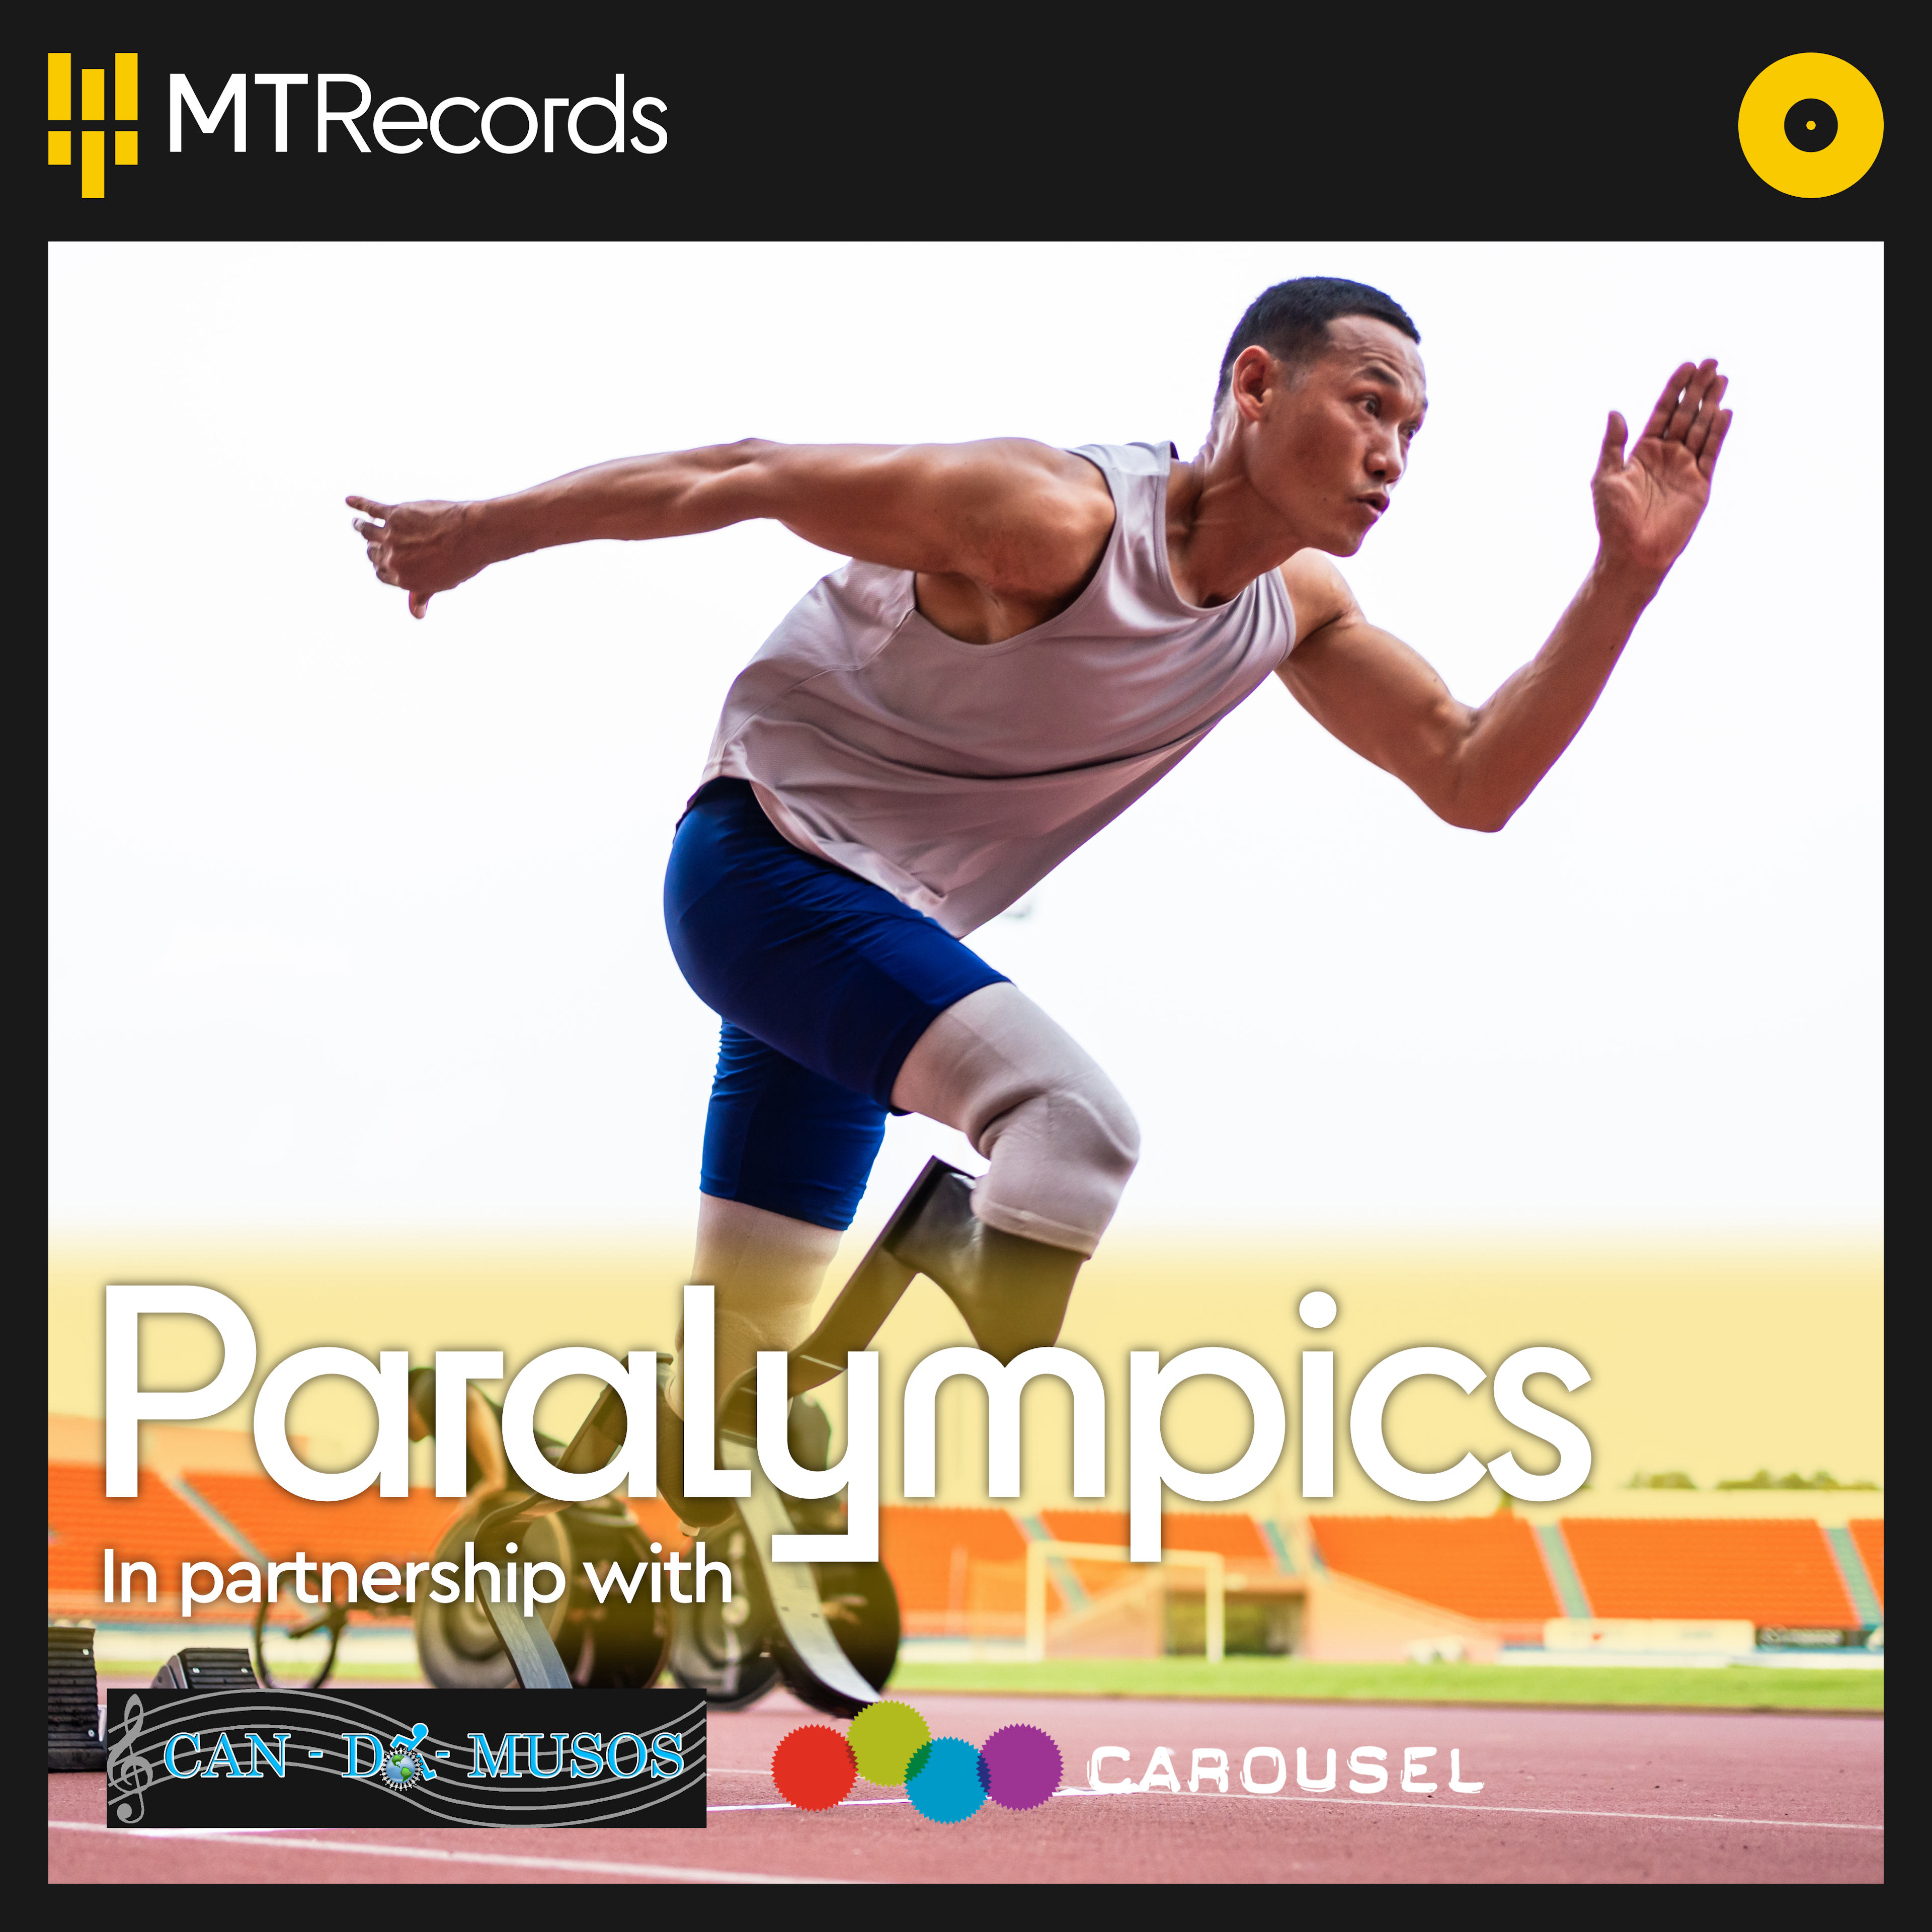 Album cover depicting: A professional athlete, wearing a white t-shirt, blue shorts and a prosthetic leg, is running on a track. The album cover also shows the logos of our label MT Records, and our partners Carousel and Can Do Musos.